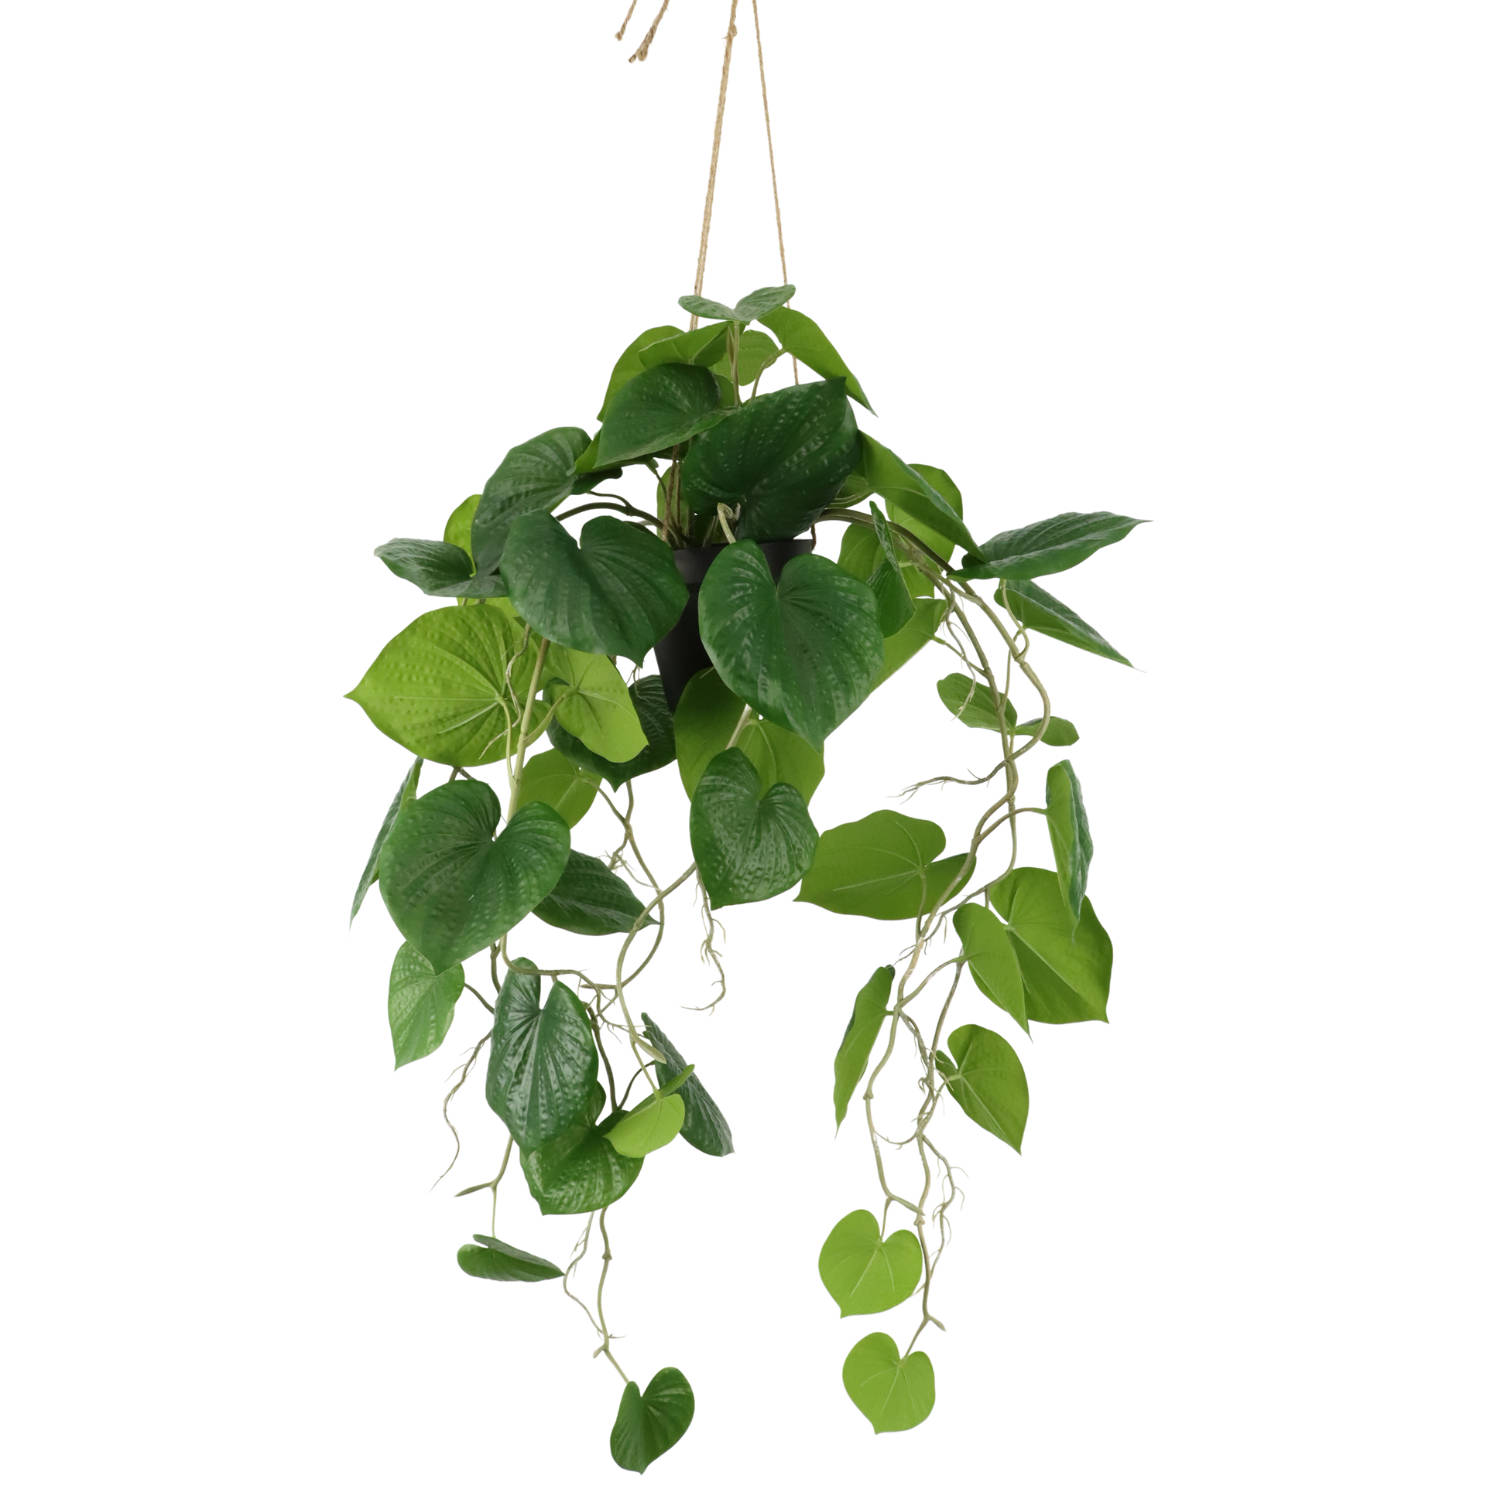 Neocheiropteres Kunst hangplant 80cm | Neppe Hangplant | Kunstplant voor binnen | Hangende kunstplant 80cm